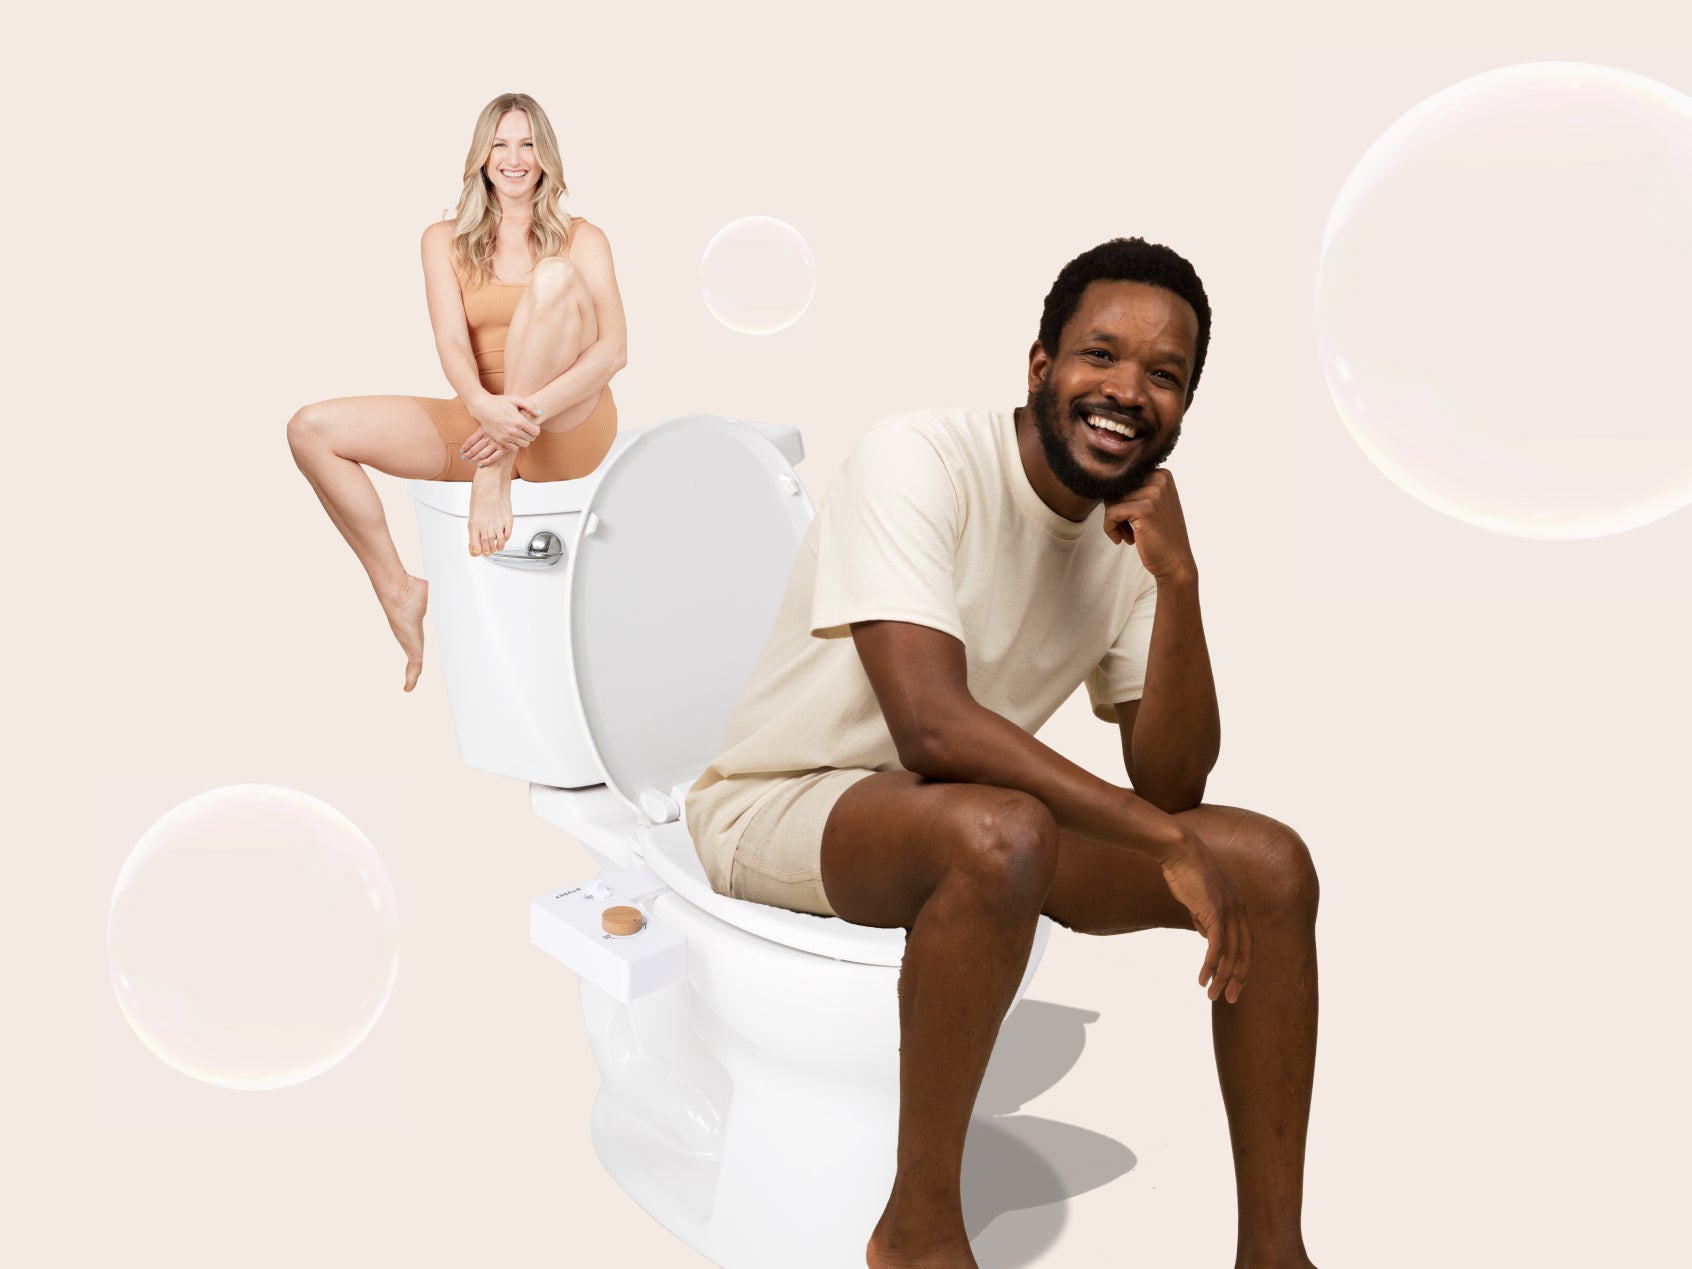 The Best Position To Poop, According to Science